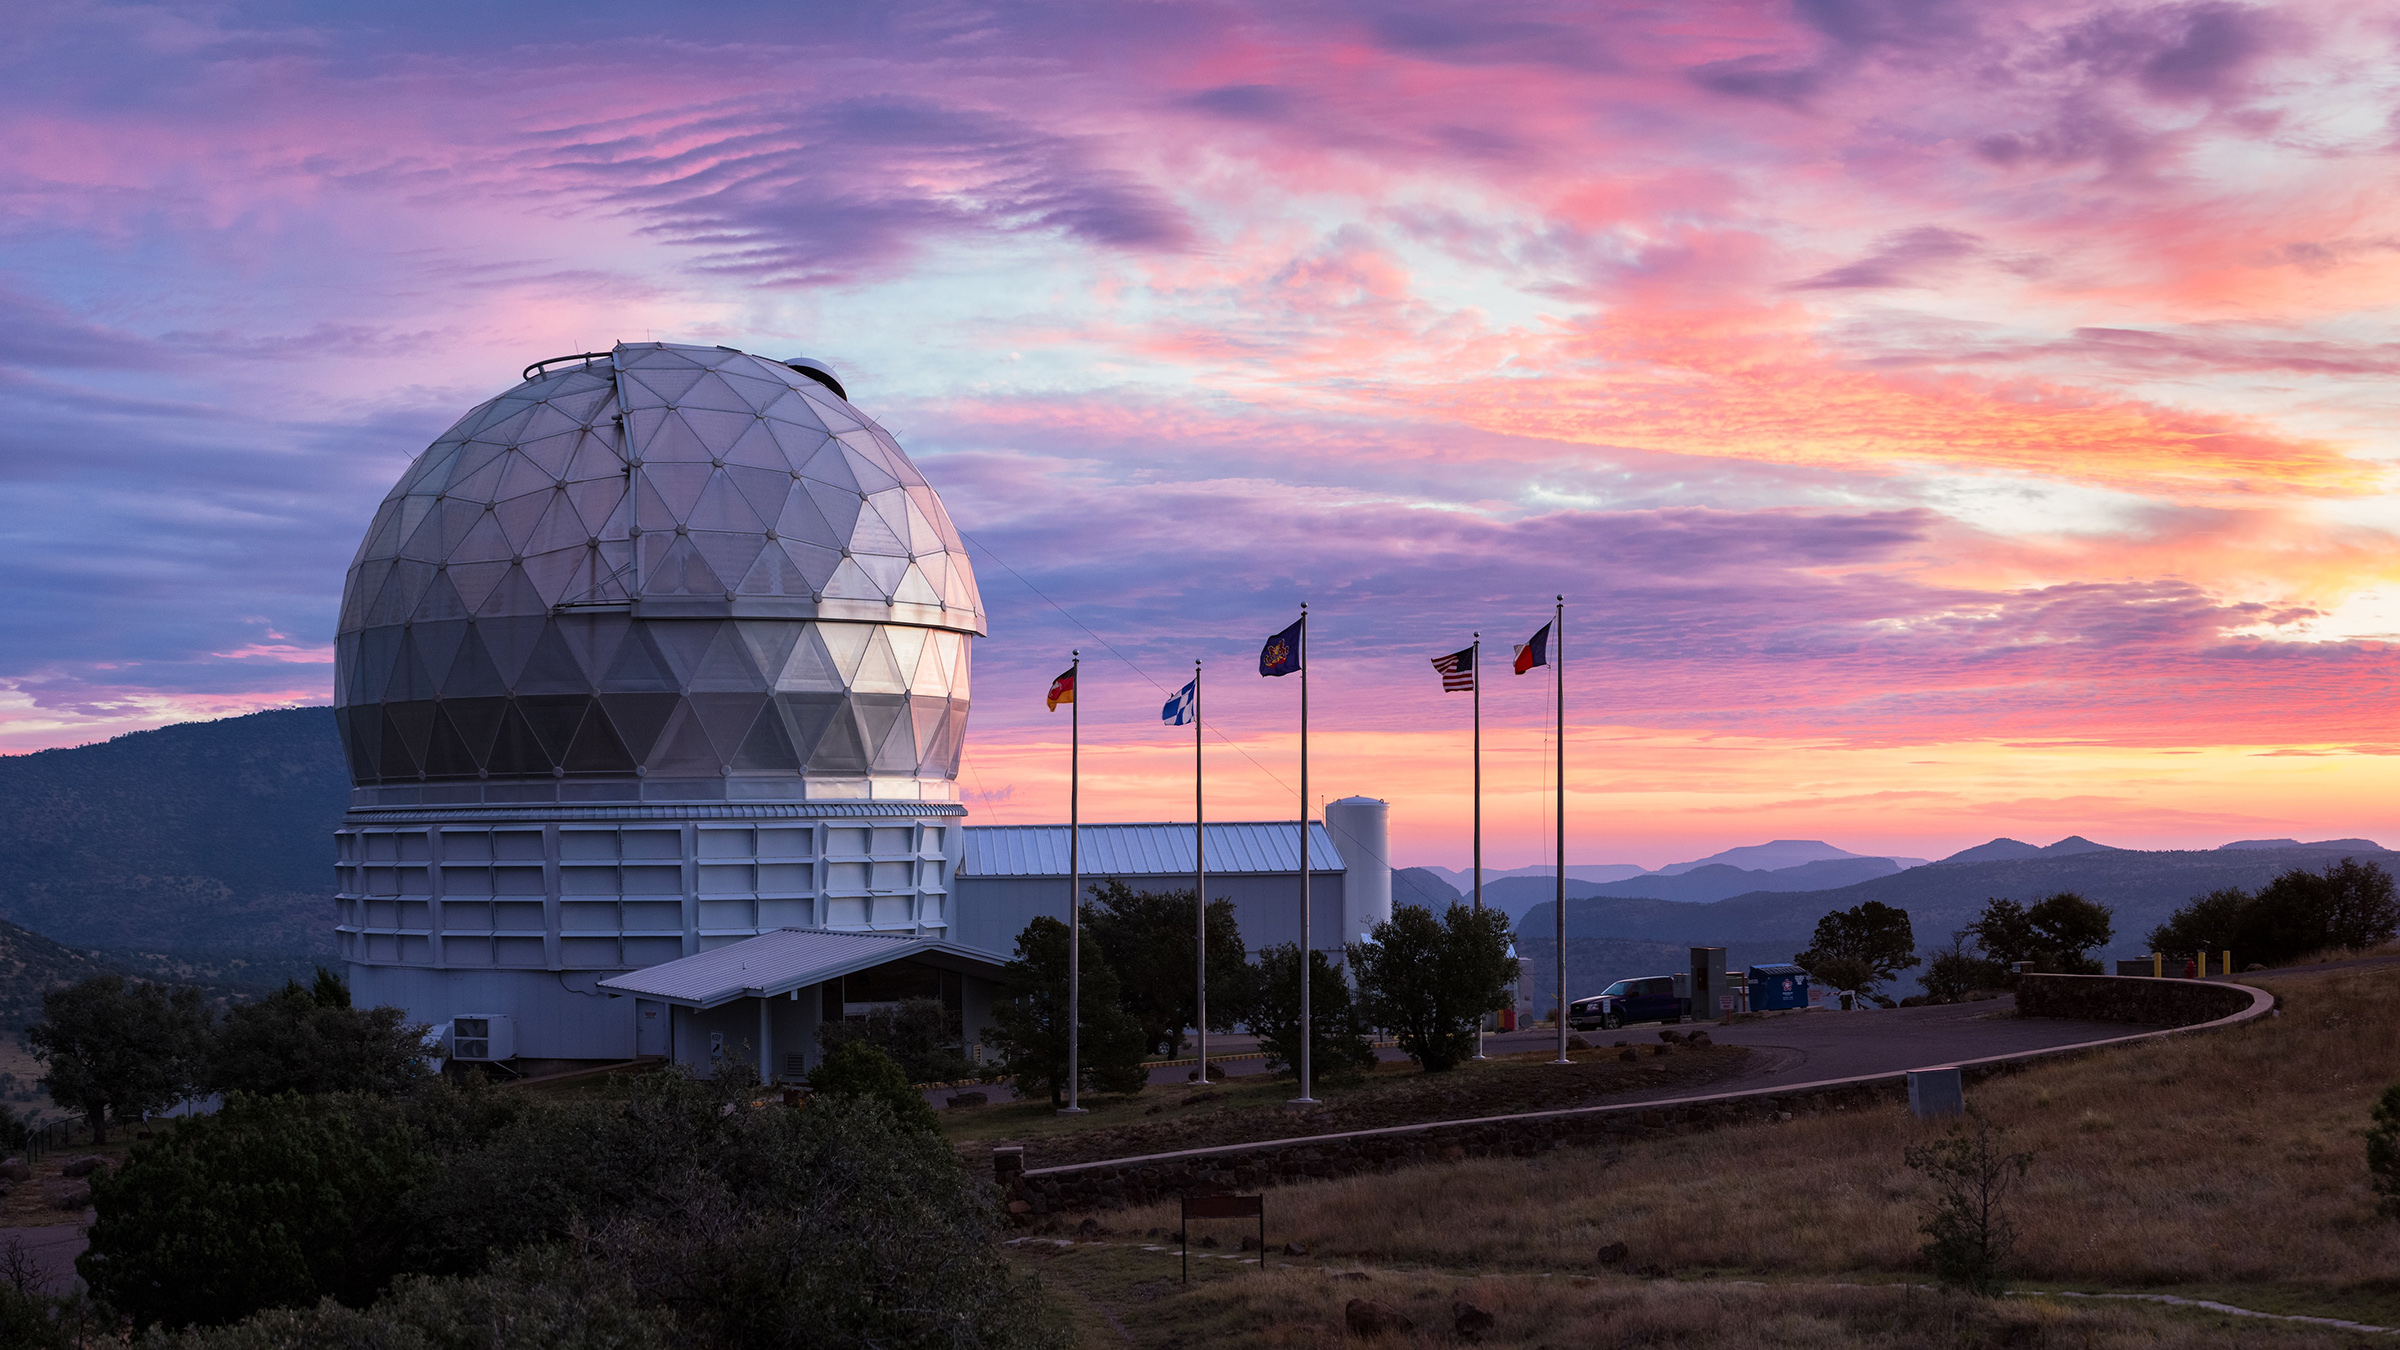 A telescope dome in front of a colorful sunset